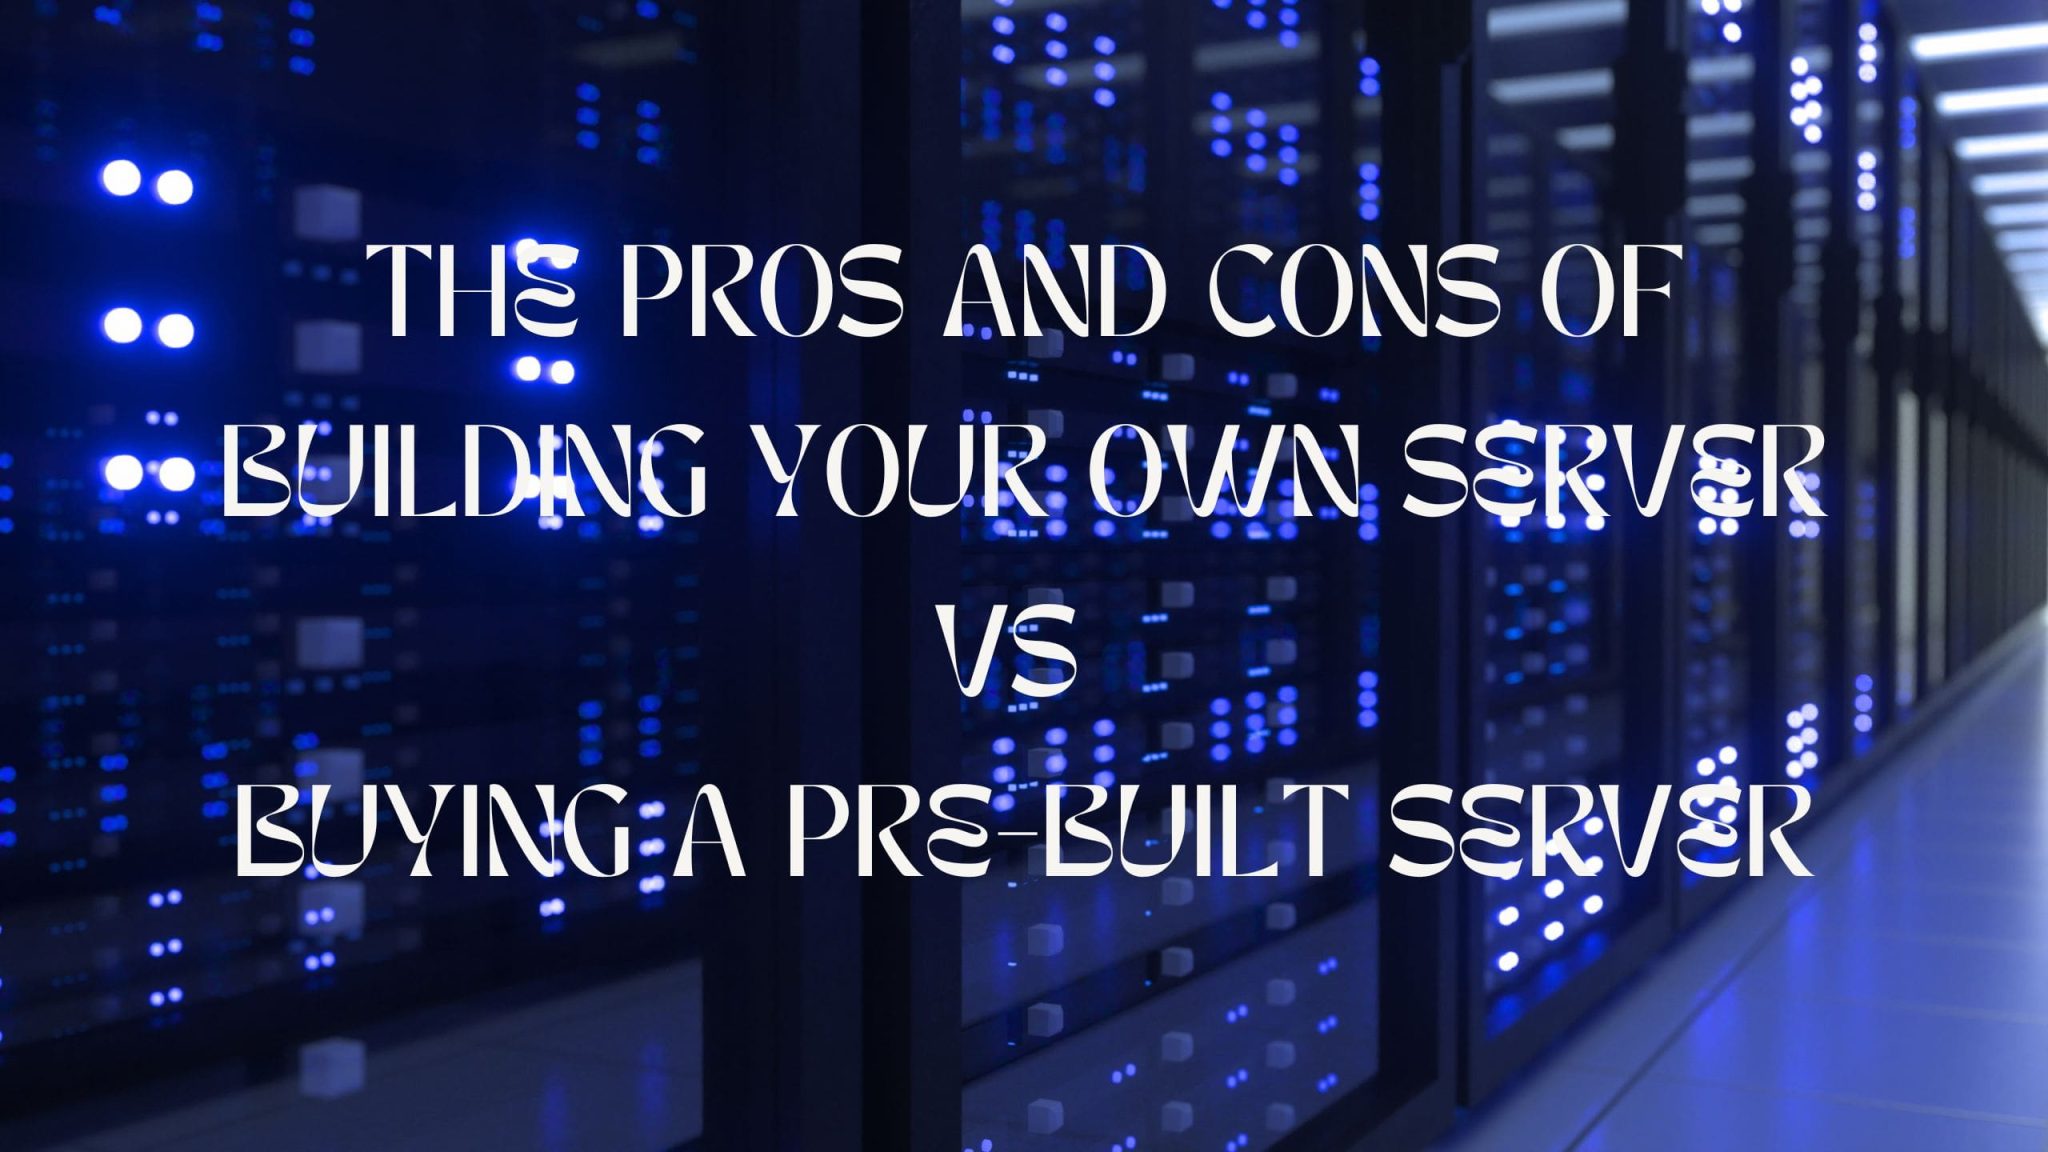 The pros and cons of Building your own server Vs Buying a pre-built server